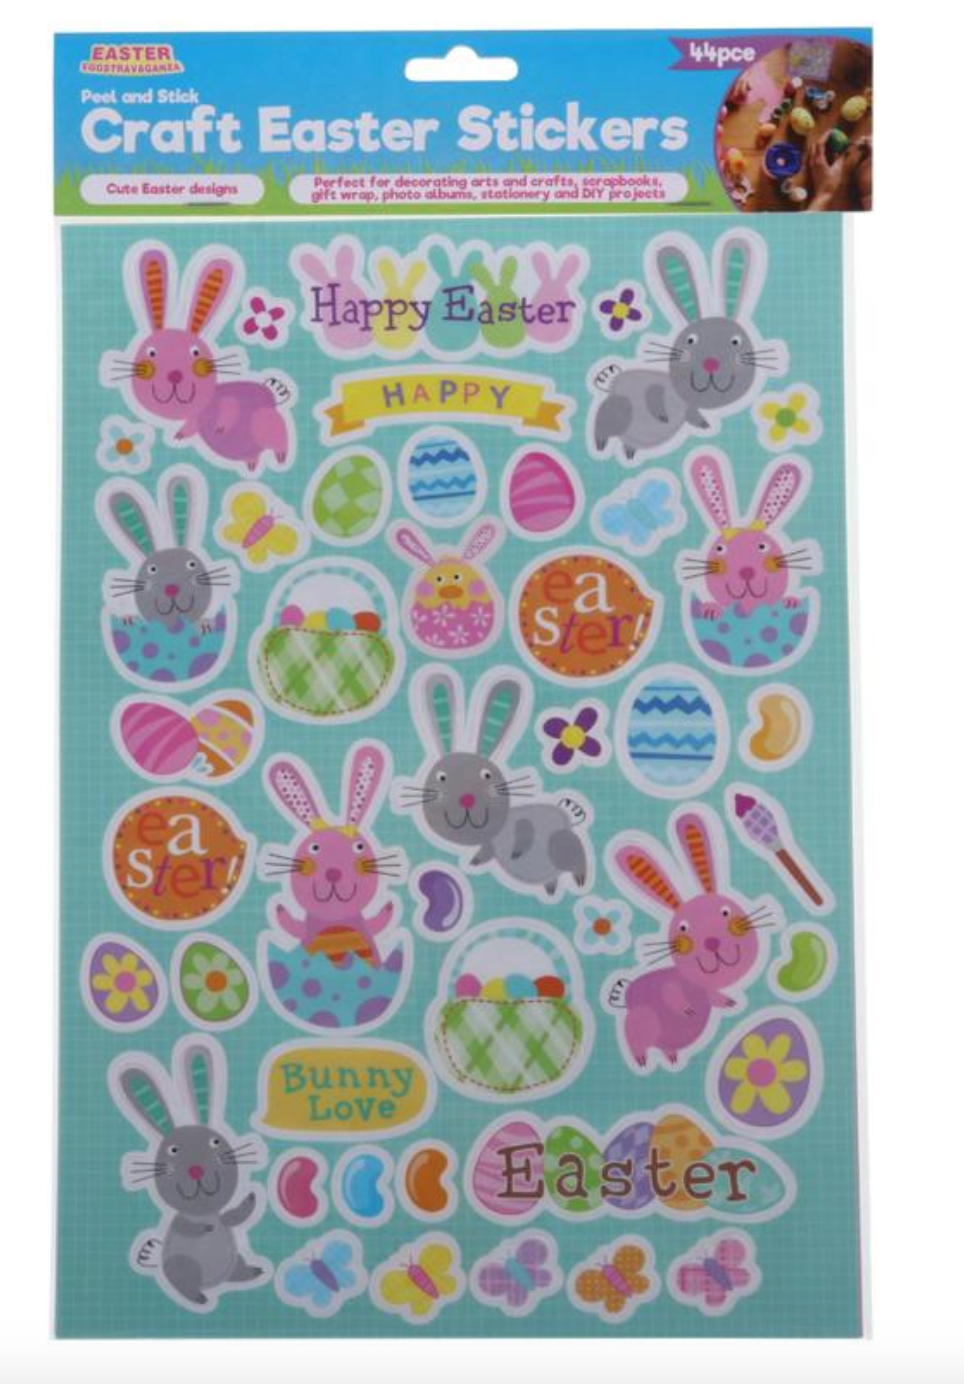 Craft Easter Stickers 44 Pce